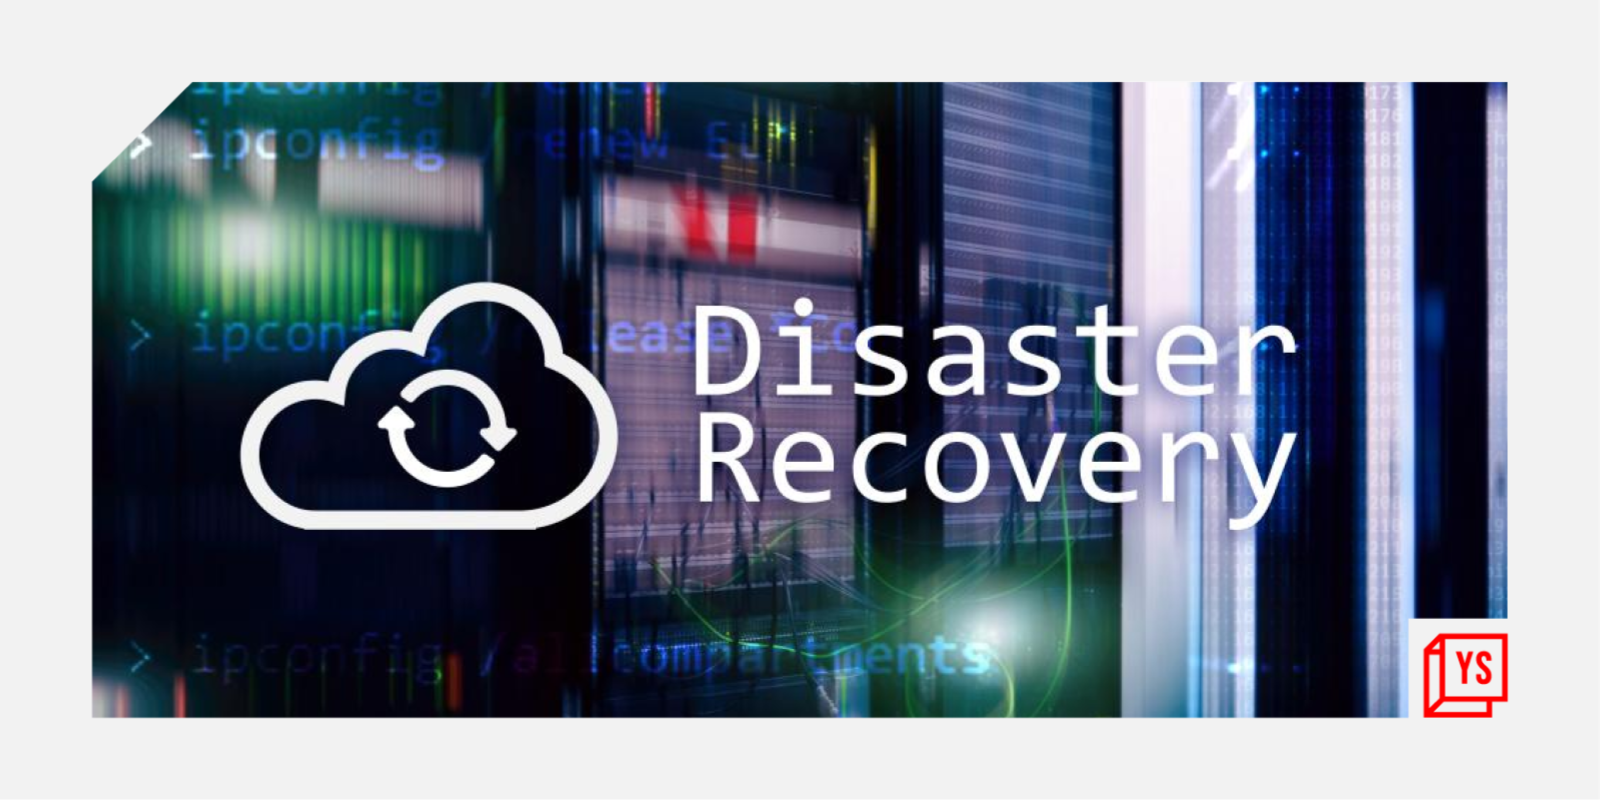 How to manage disaster recovery in cloud computing

